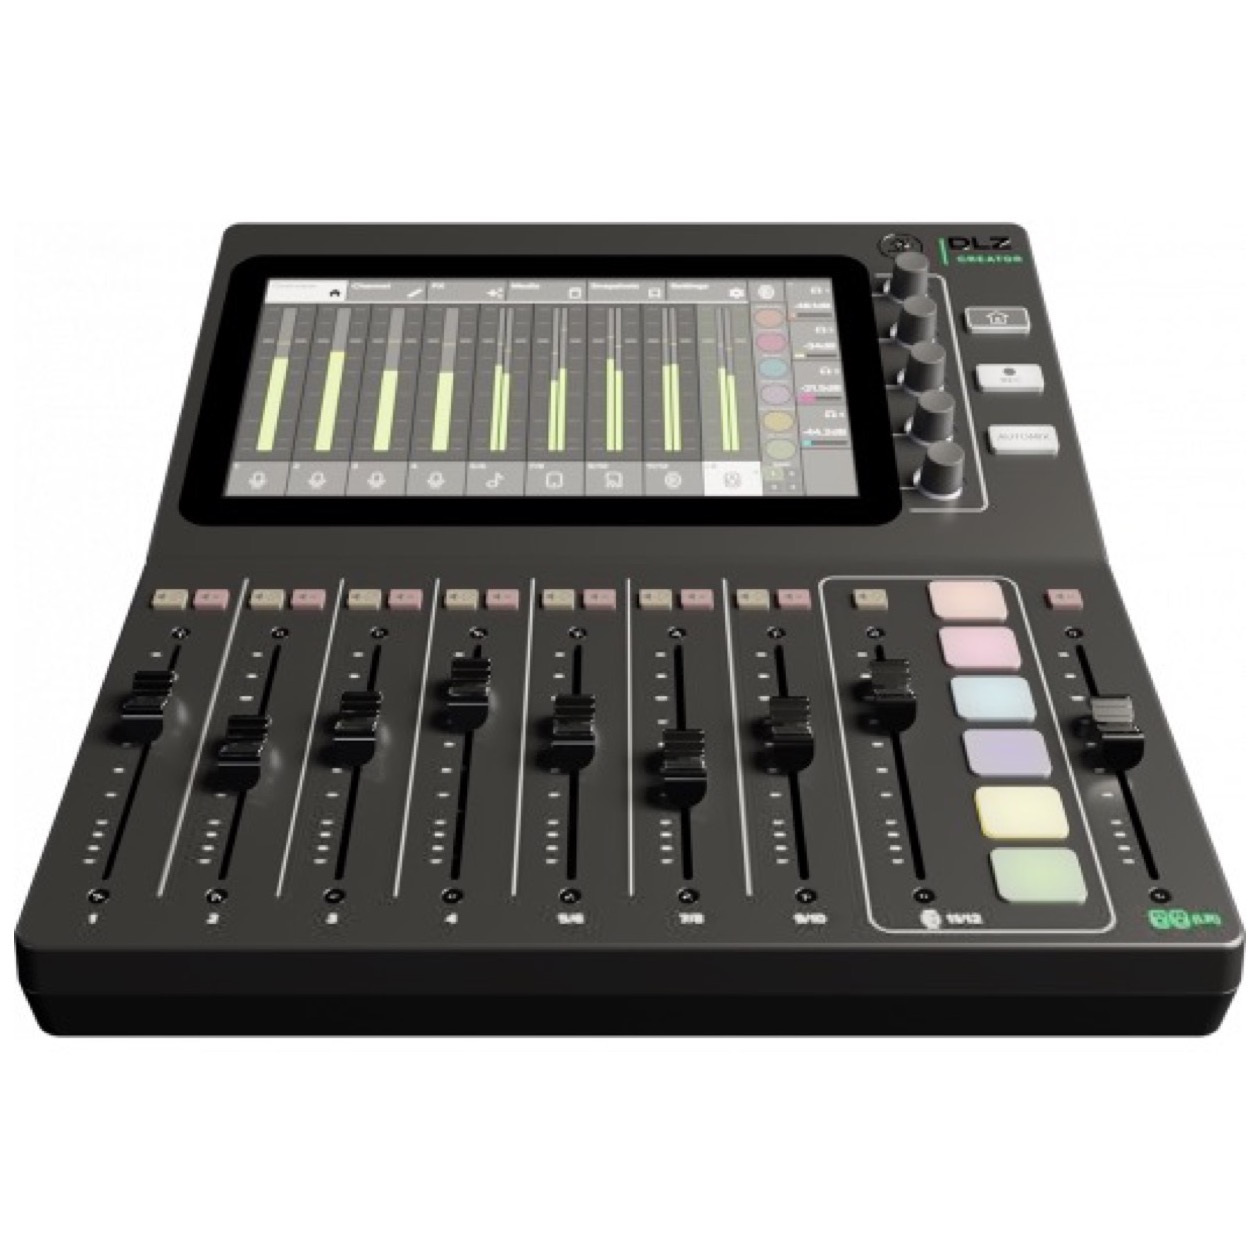 Mackie DLZ Creator Adaptive Digital Mixer for Podcasting and Streaming Digitale Mixer, IN VOORRAAD, BLACK FRIDAY 2024 AANBIEDING !